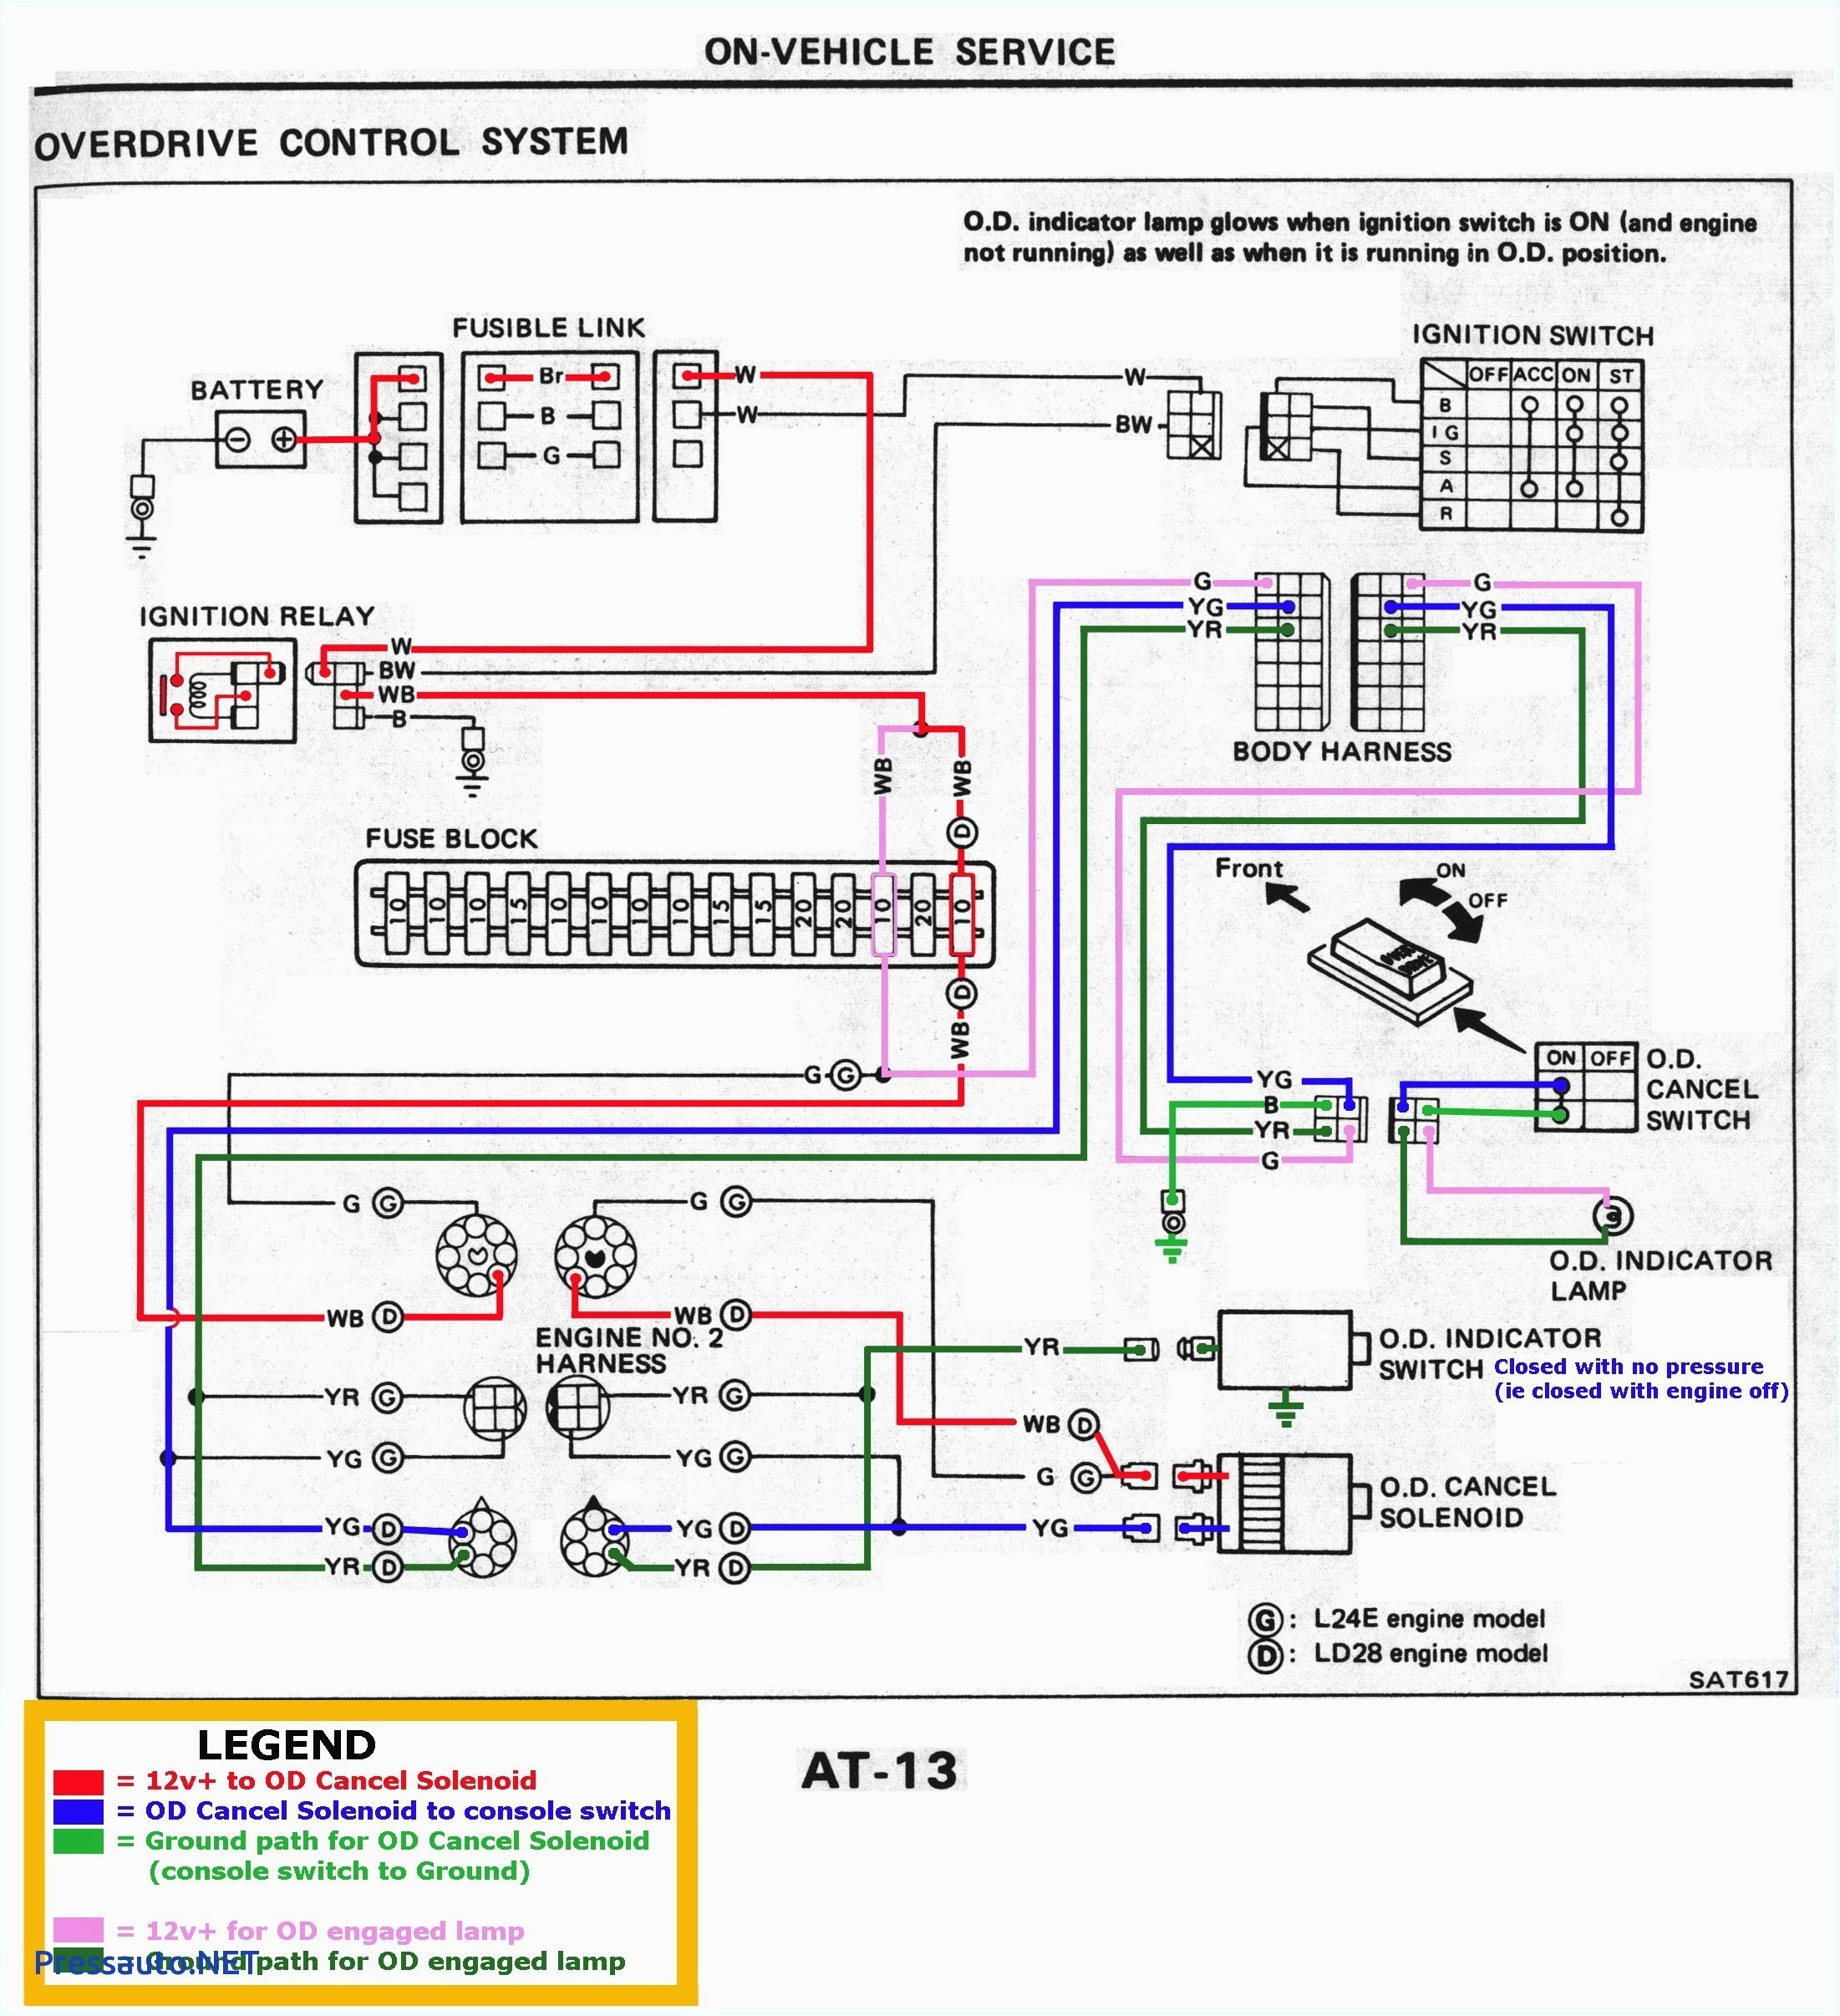 How to Wire 3 Switches to One Light Diagram Wiring Diagram for 3 Way Switch with Light Free Download Wiring